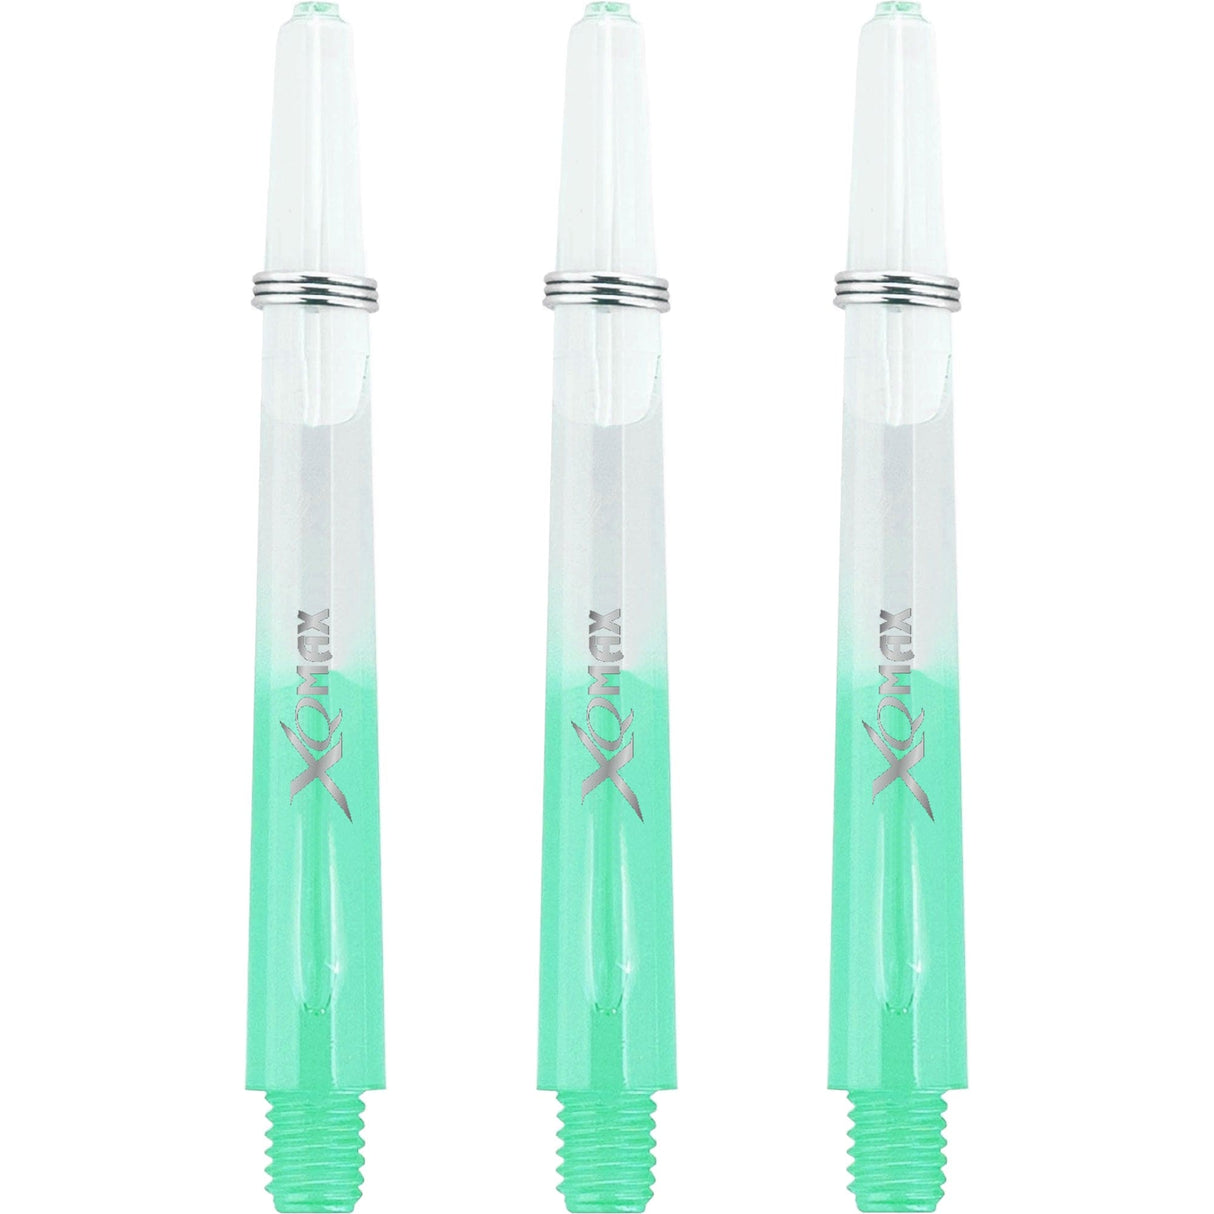 XQMax Gradient Polycarbonate Dart Shafts - with Logo - includes Springs - Transparent & Green Medium